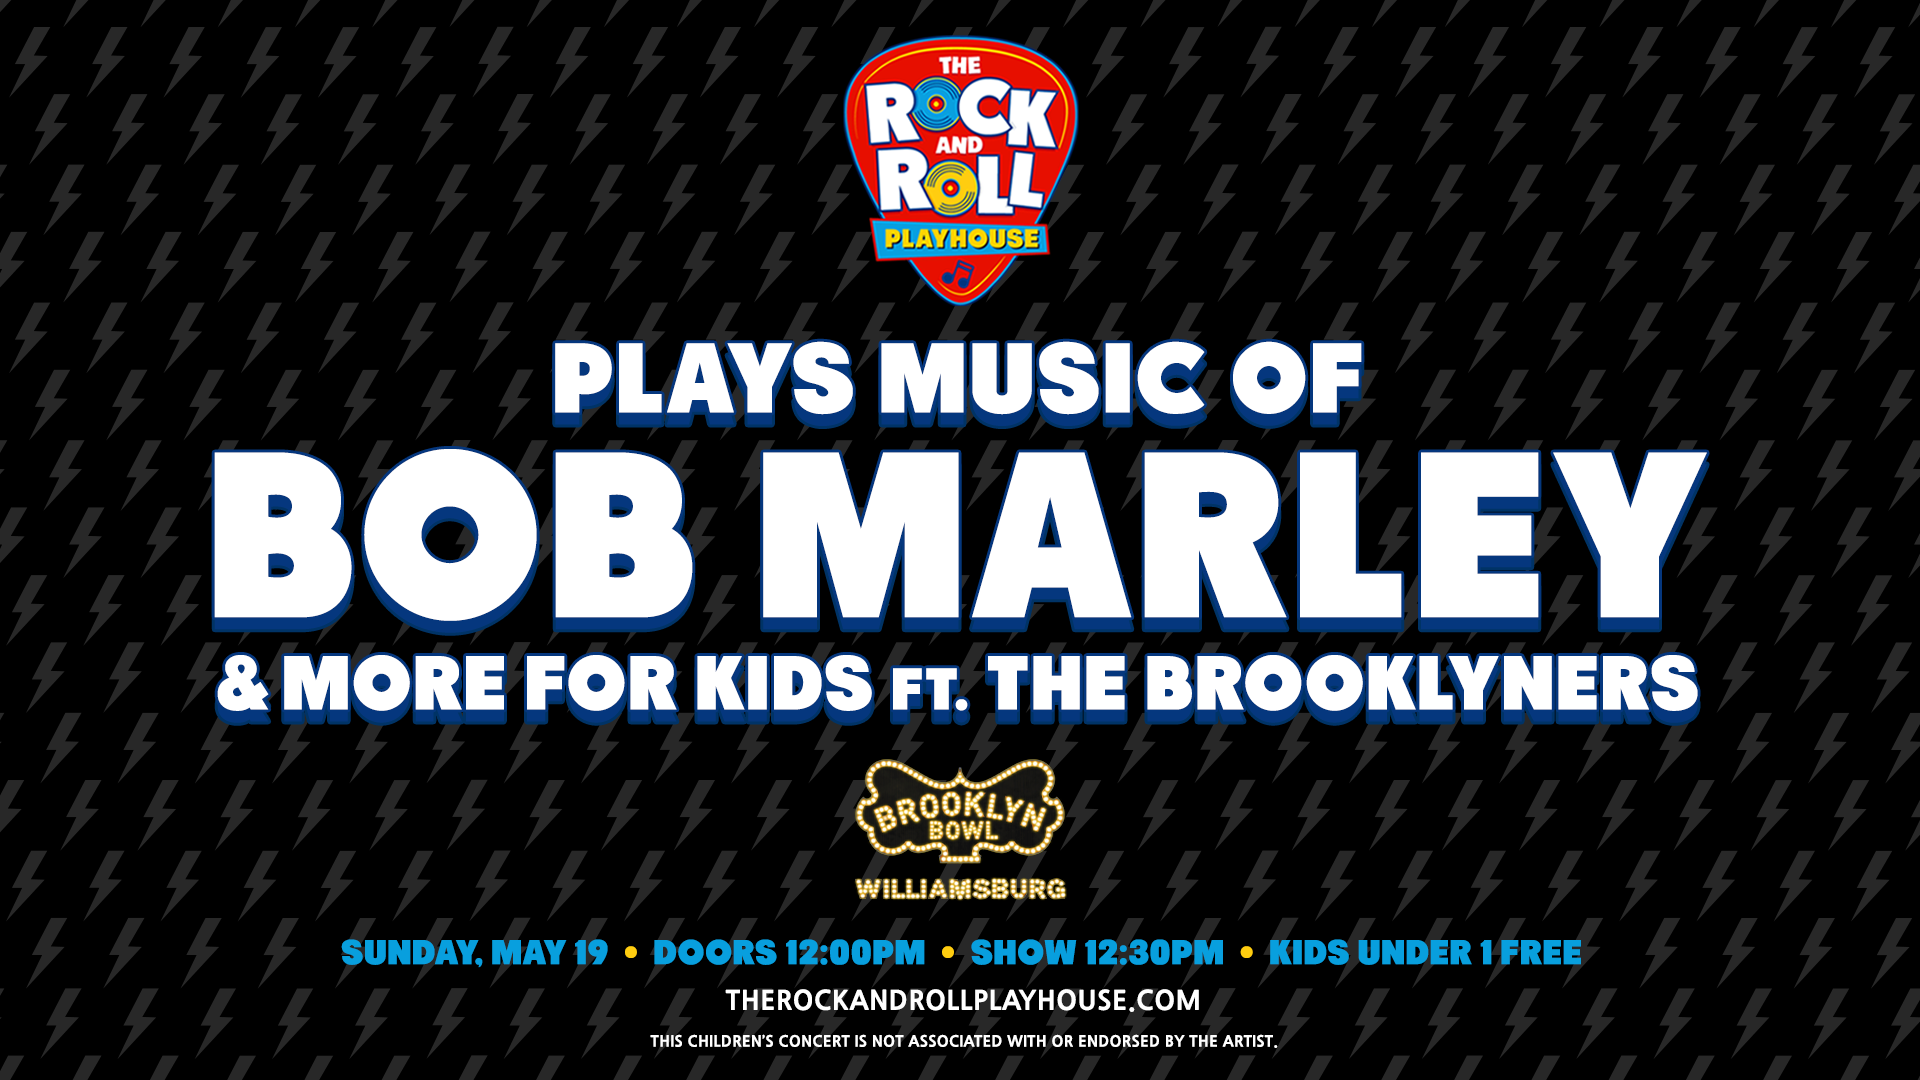 The Rock and Roll Playhouse plays the Music of Bob Marley + More for Kids